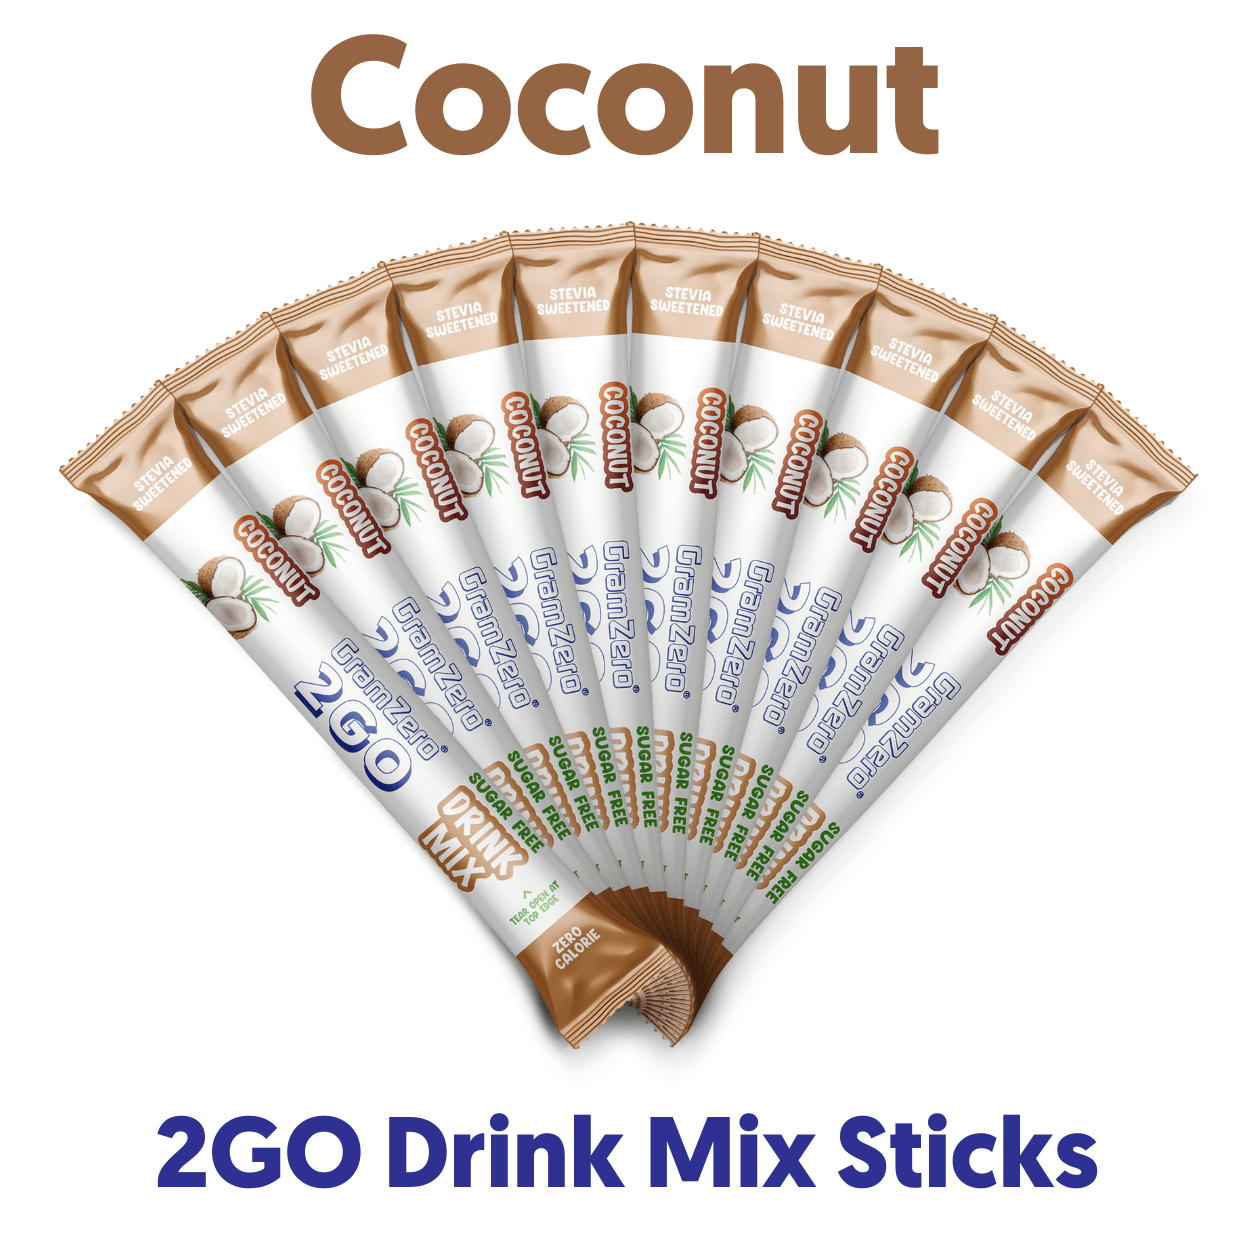 COCONUT 2GO Sugar Free Drink Mix Sticks: 10 Pack ~ Great for Loaded Tea Kits